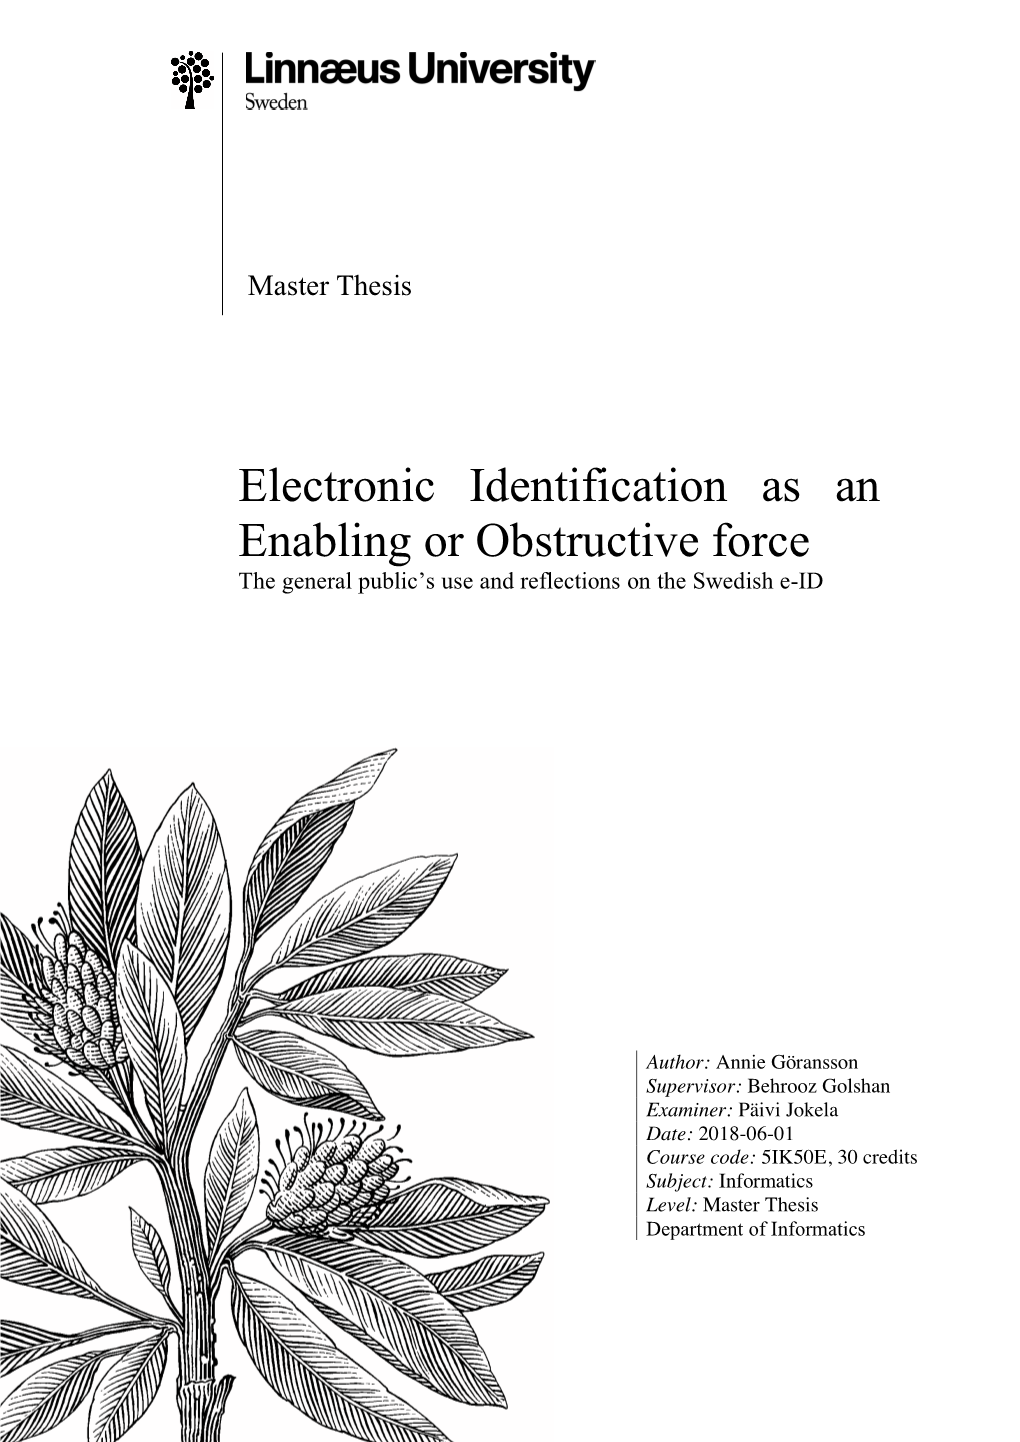 Electronic Identification As an Enabling Or Obstructive Force the General Public’S Use and Reflections on the Swedish E-ID